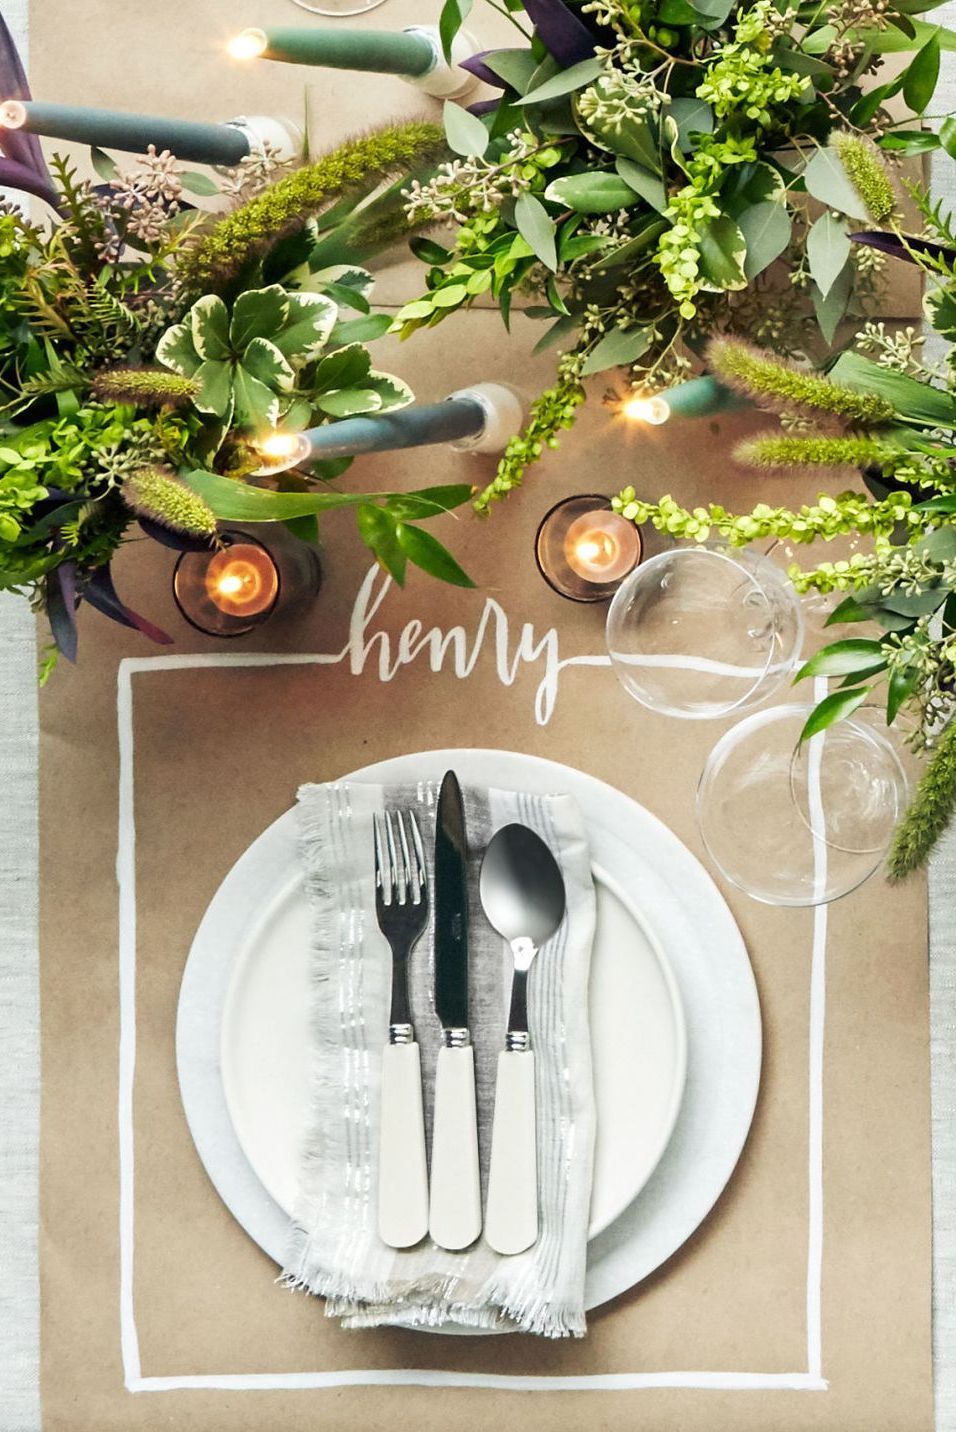 Kraft paper table runner with guests' names written in white marker